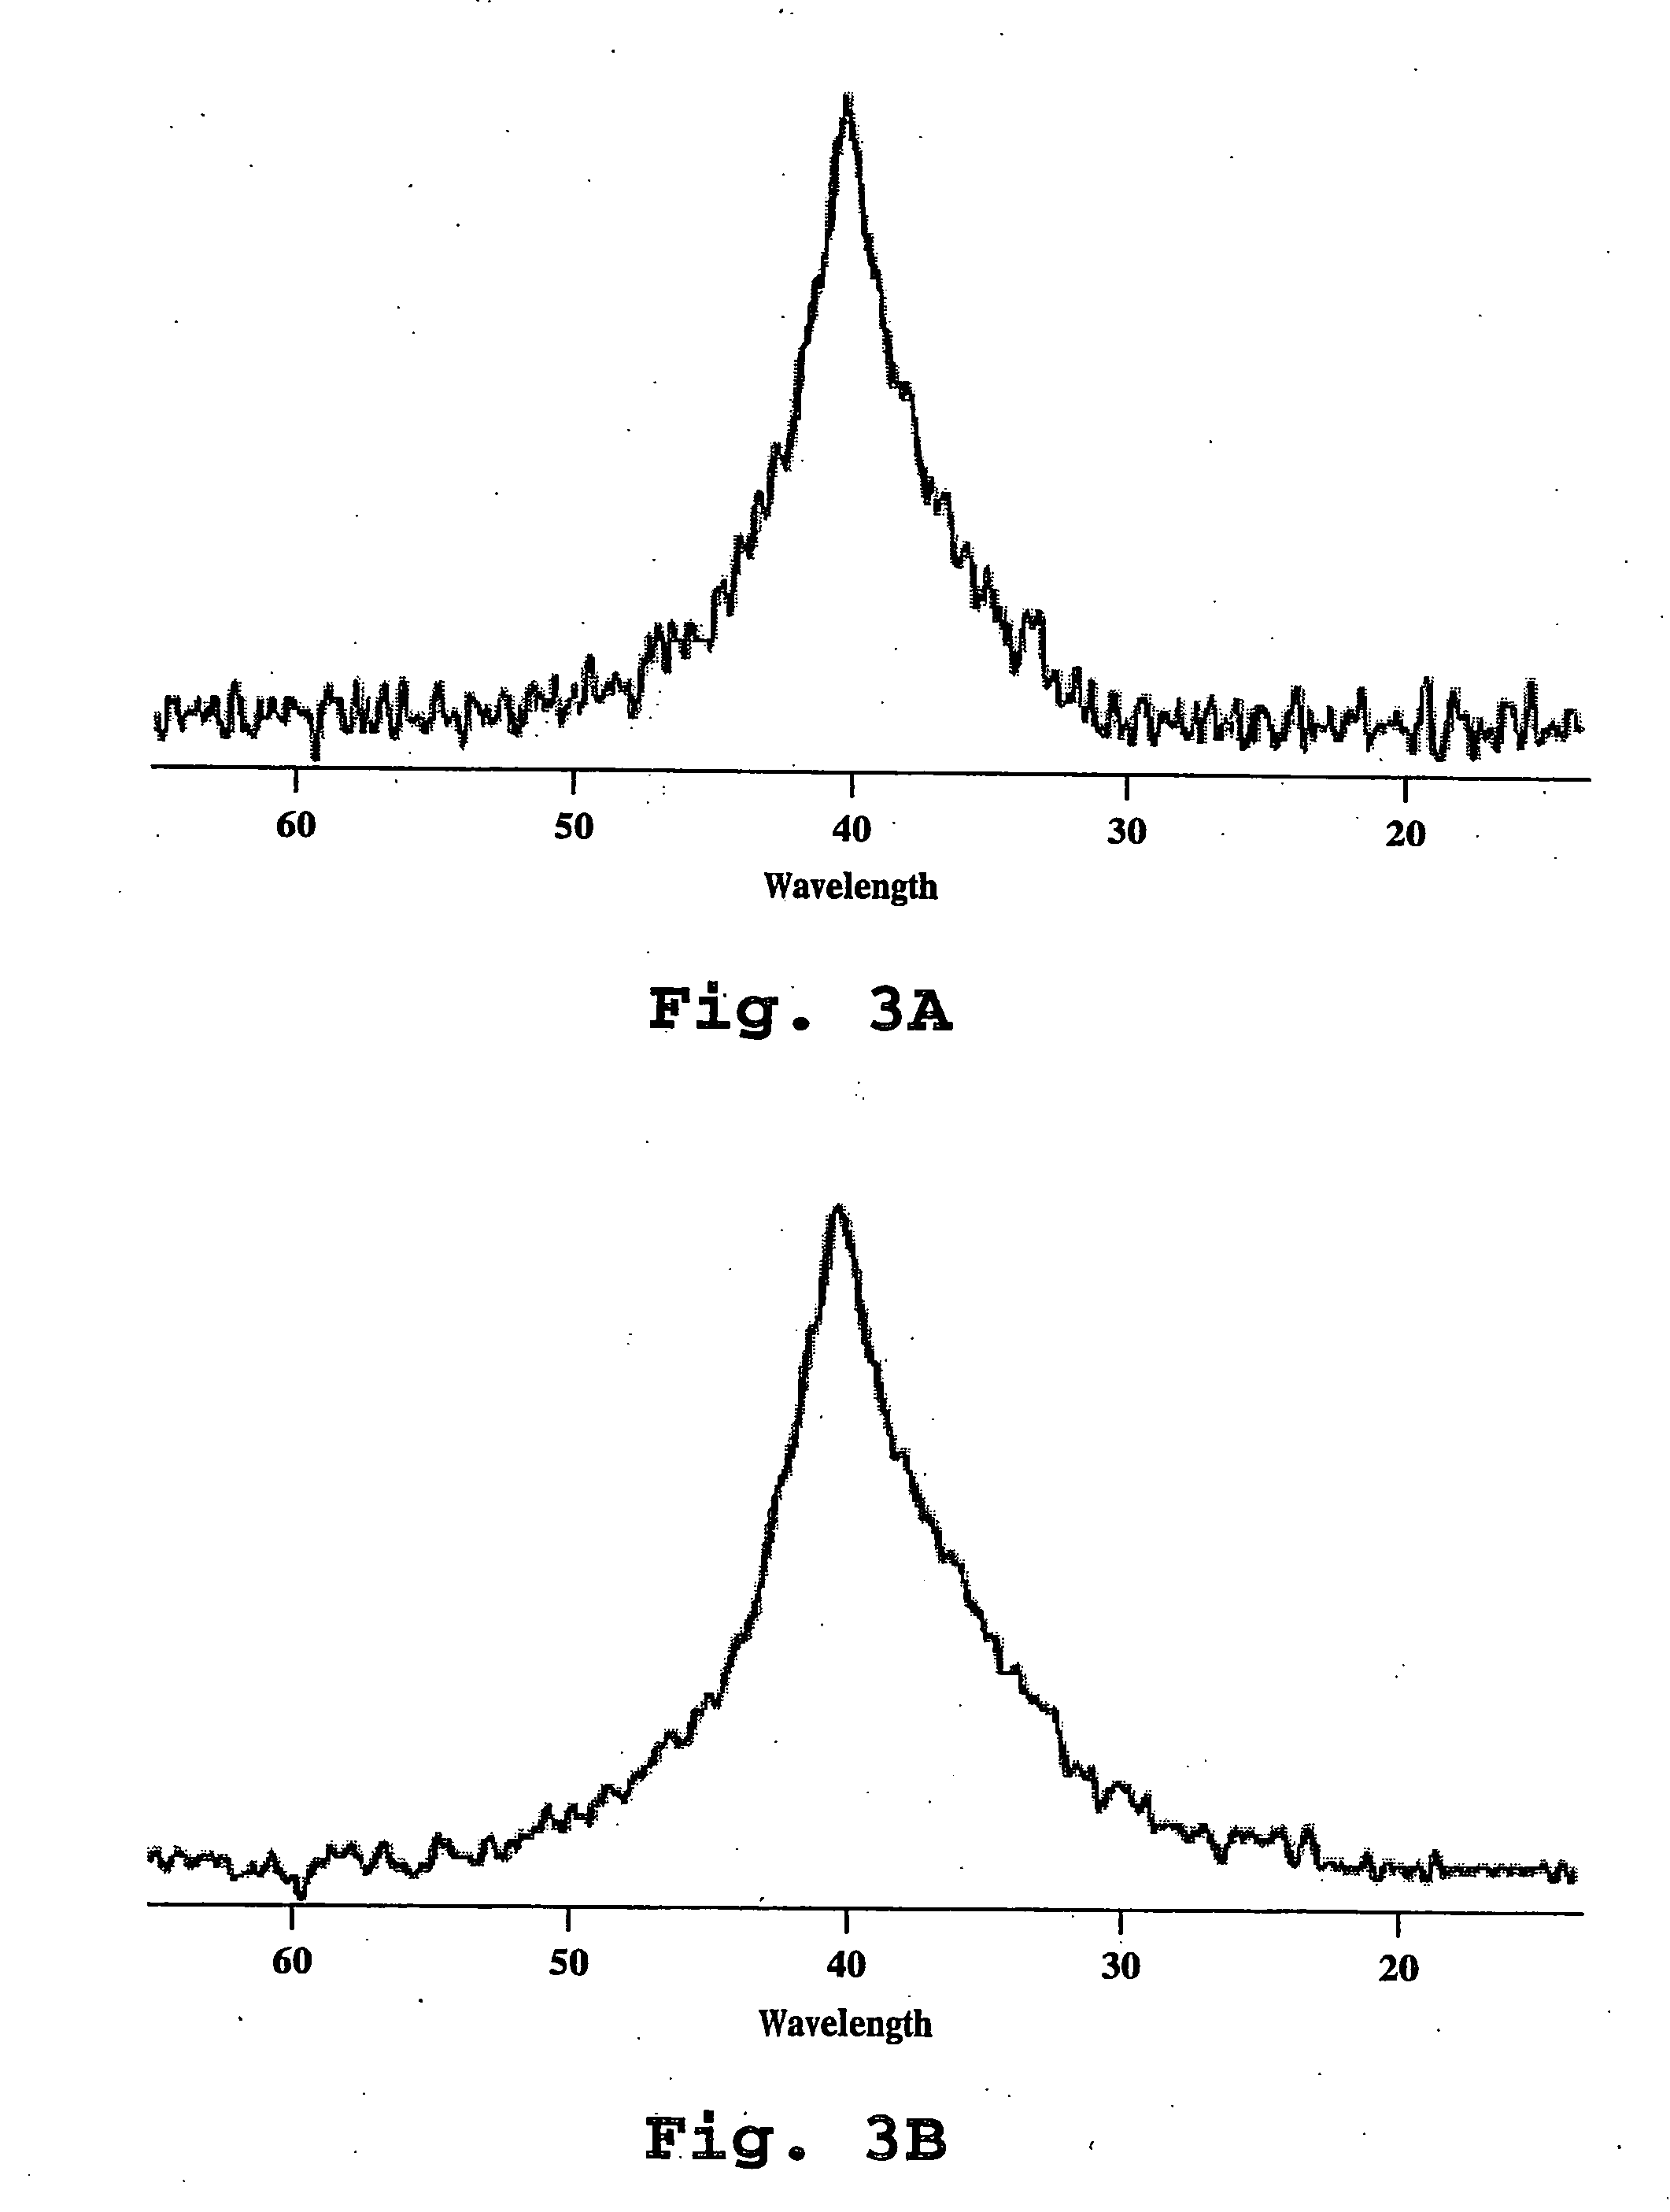 Liposomes containing an entrapped compound in supersaturated solution